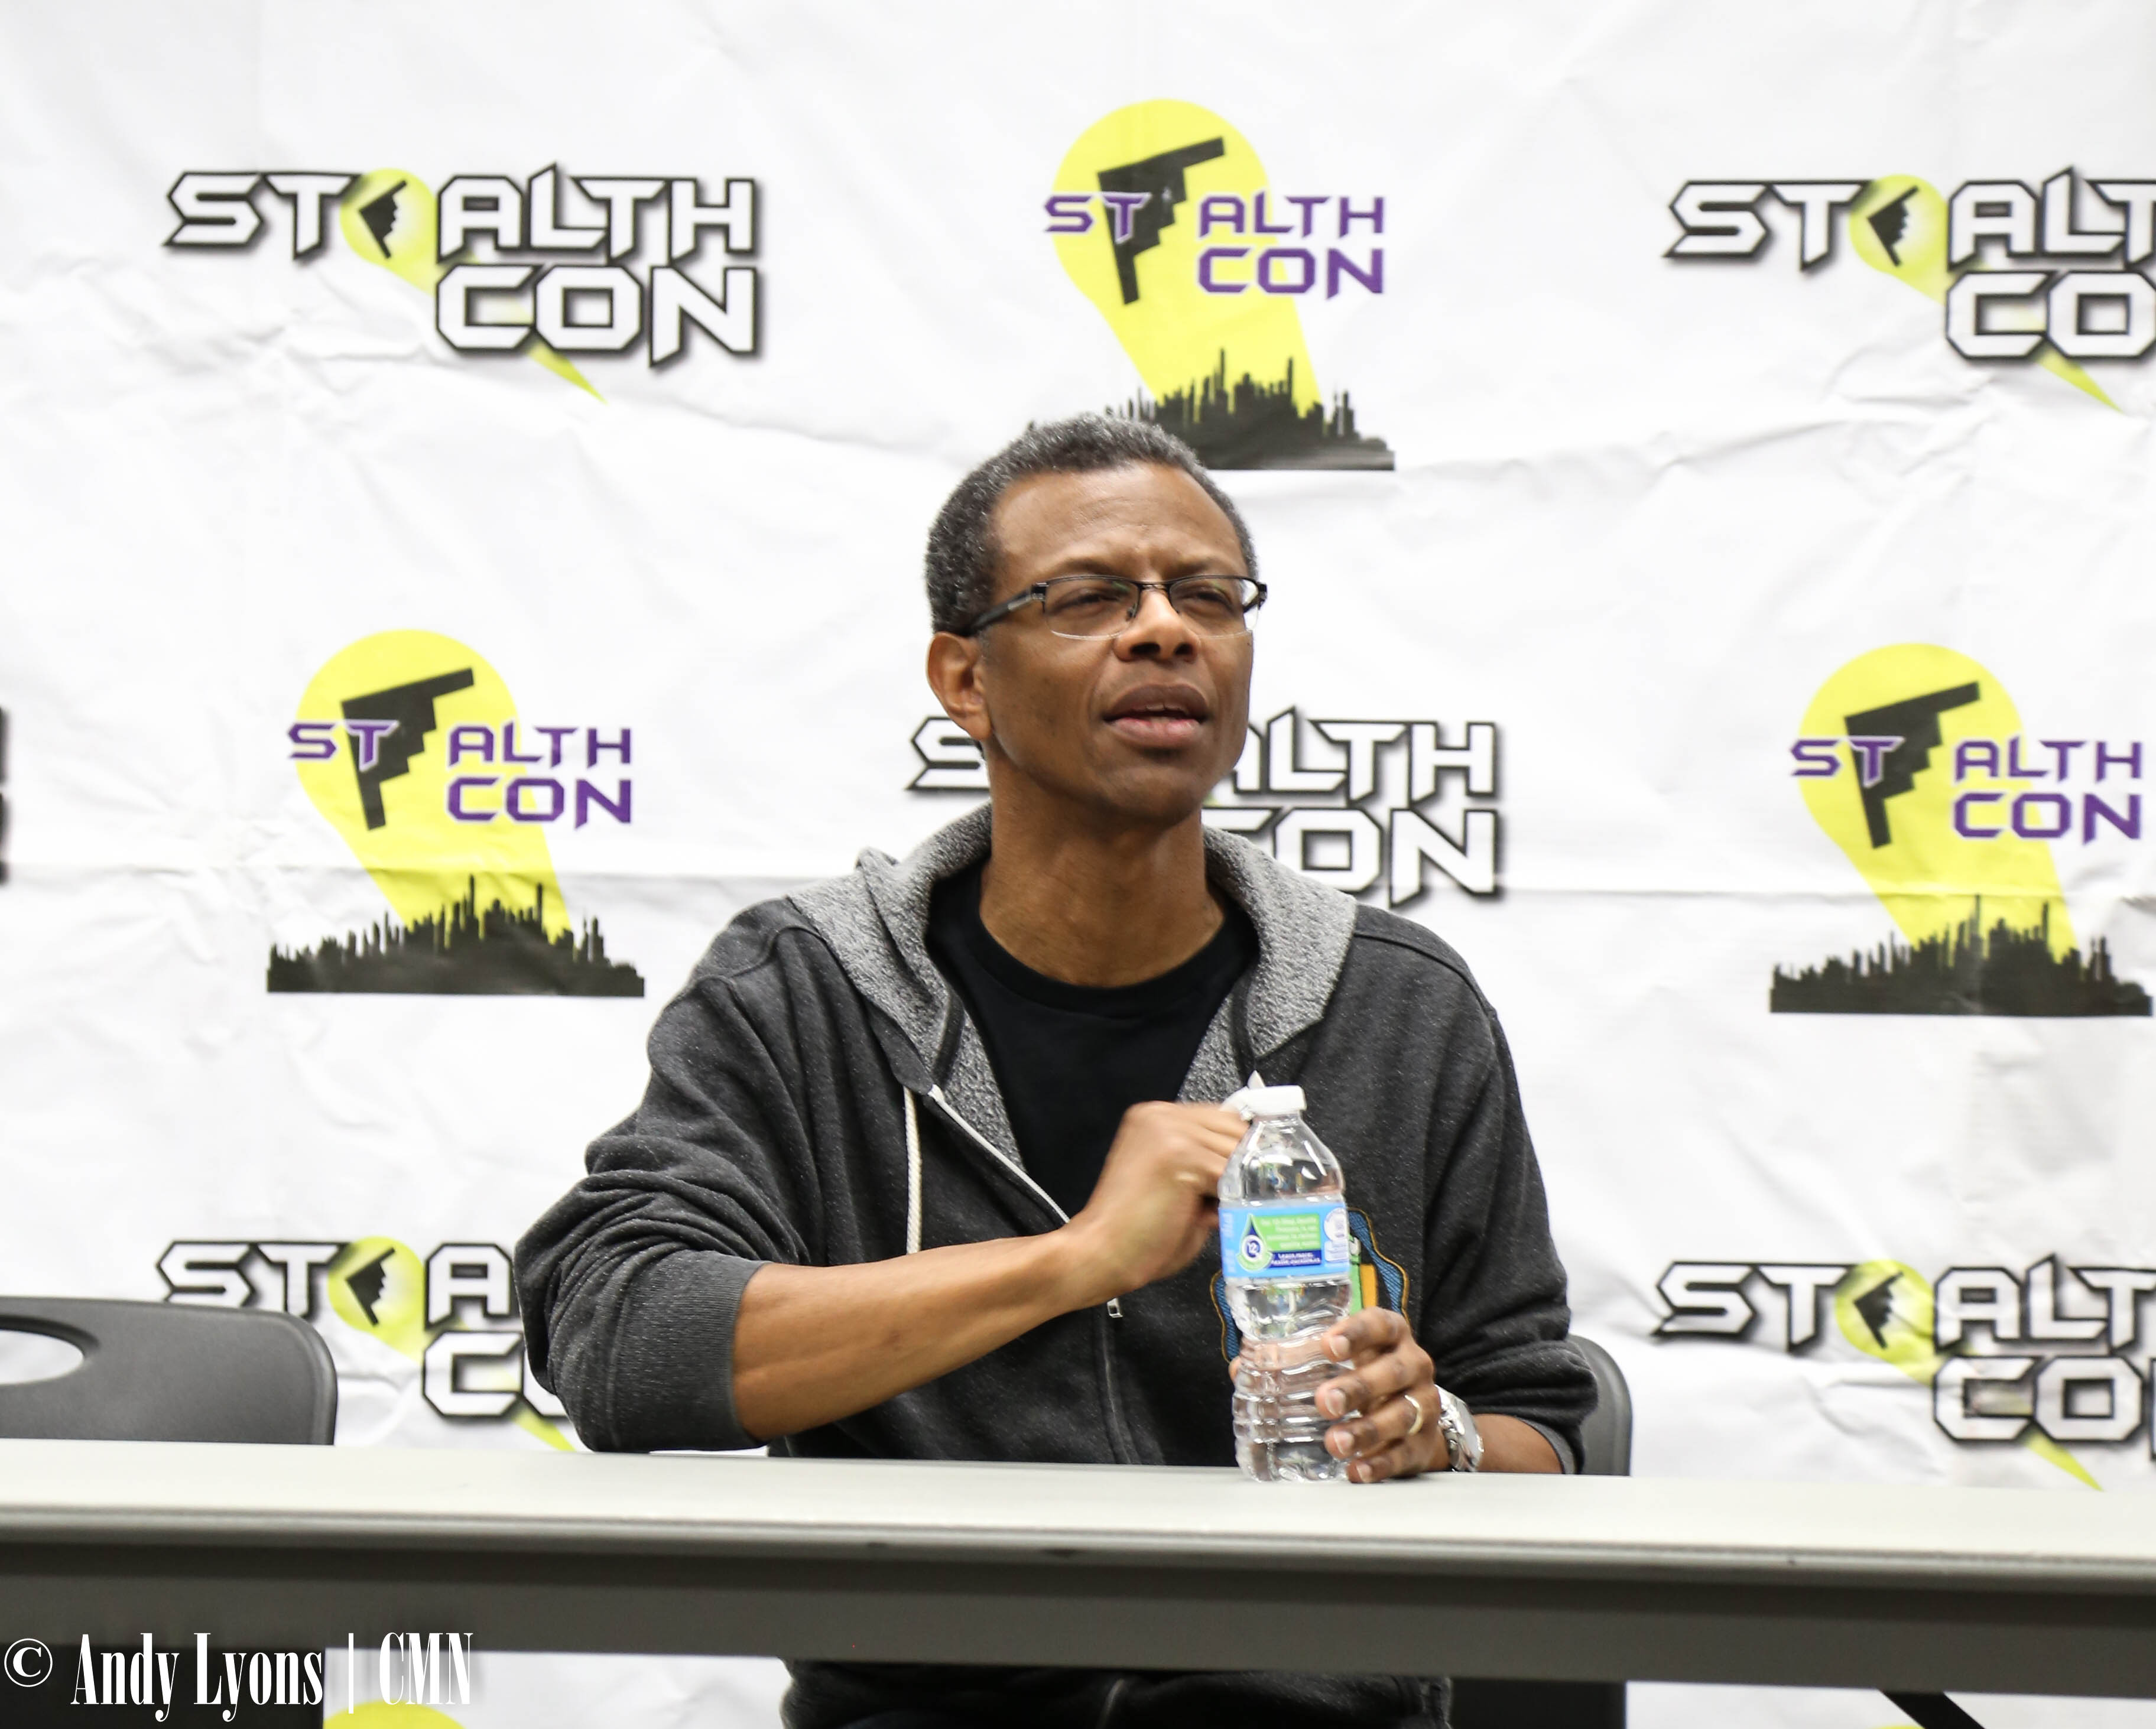 Actor Phil Lamarr talks inspiration, popularity at Stealth Con